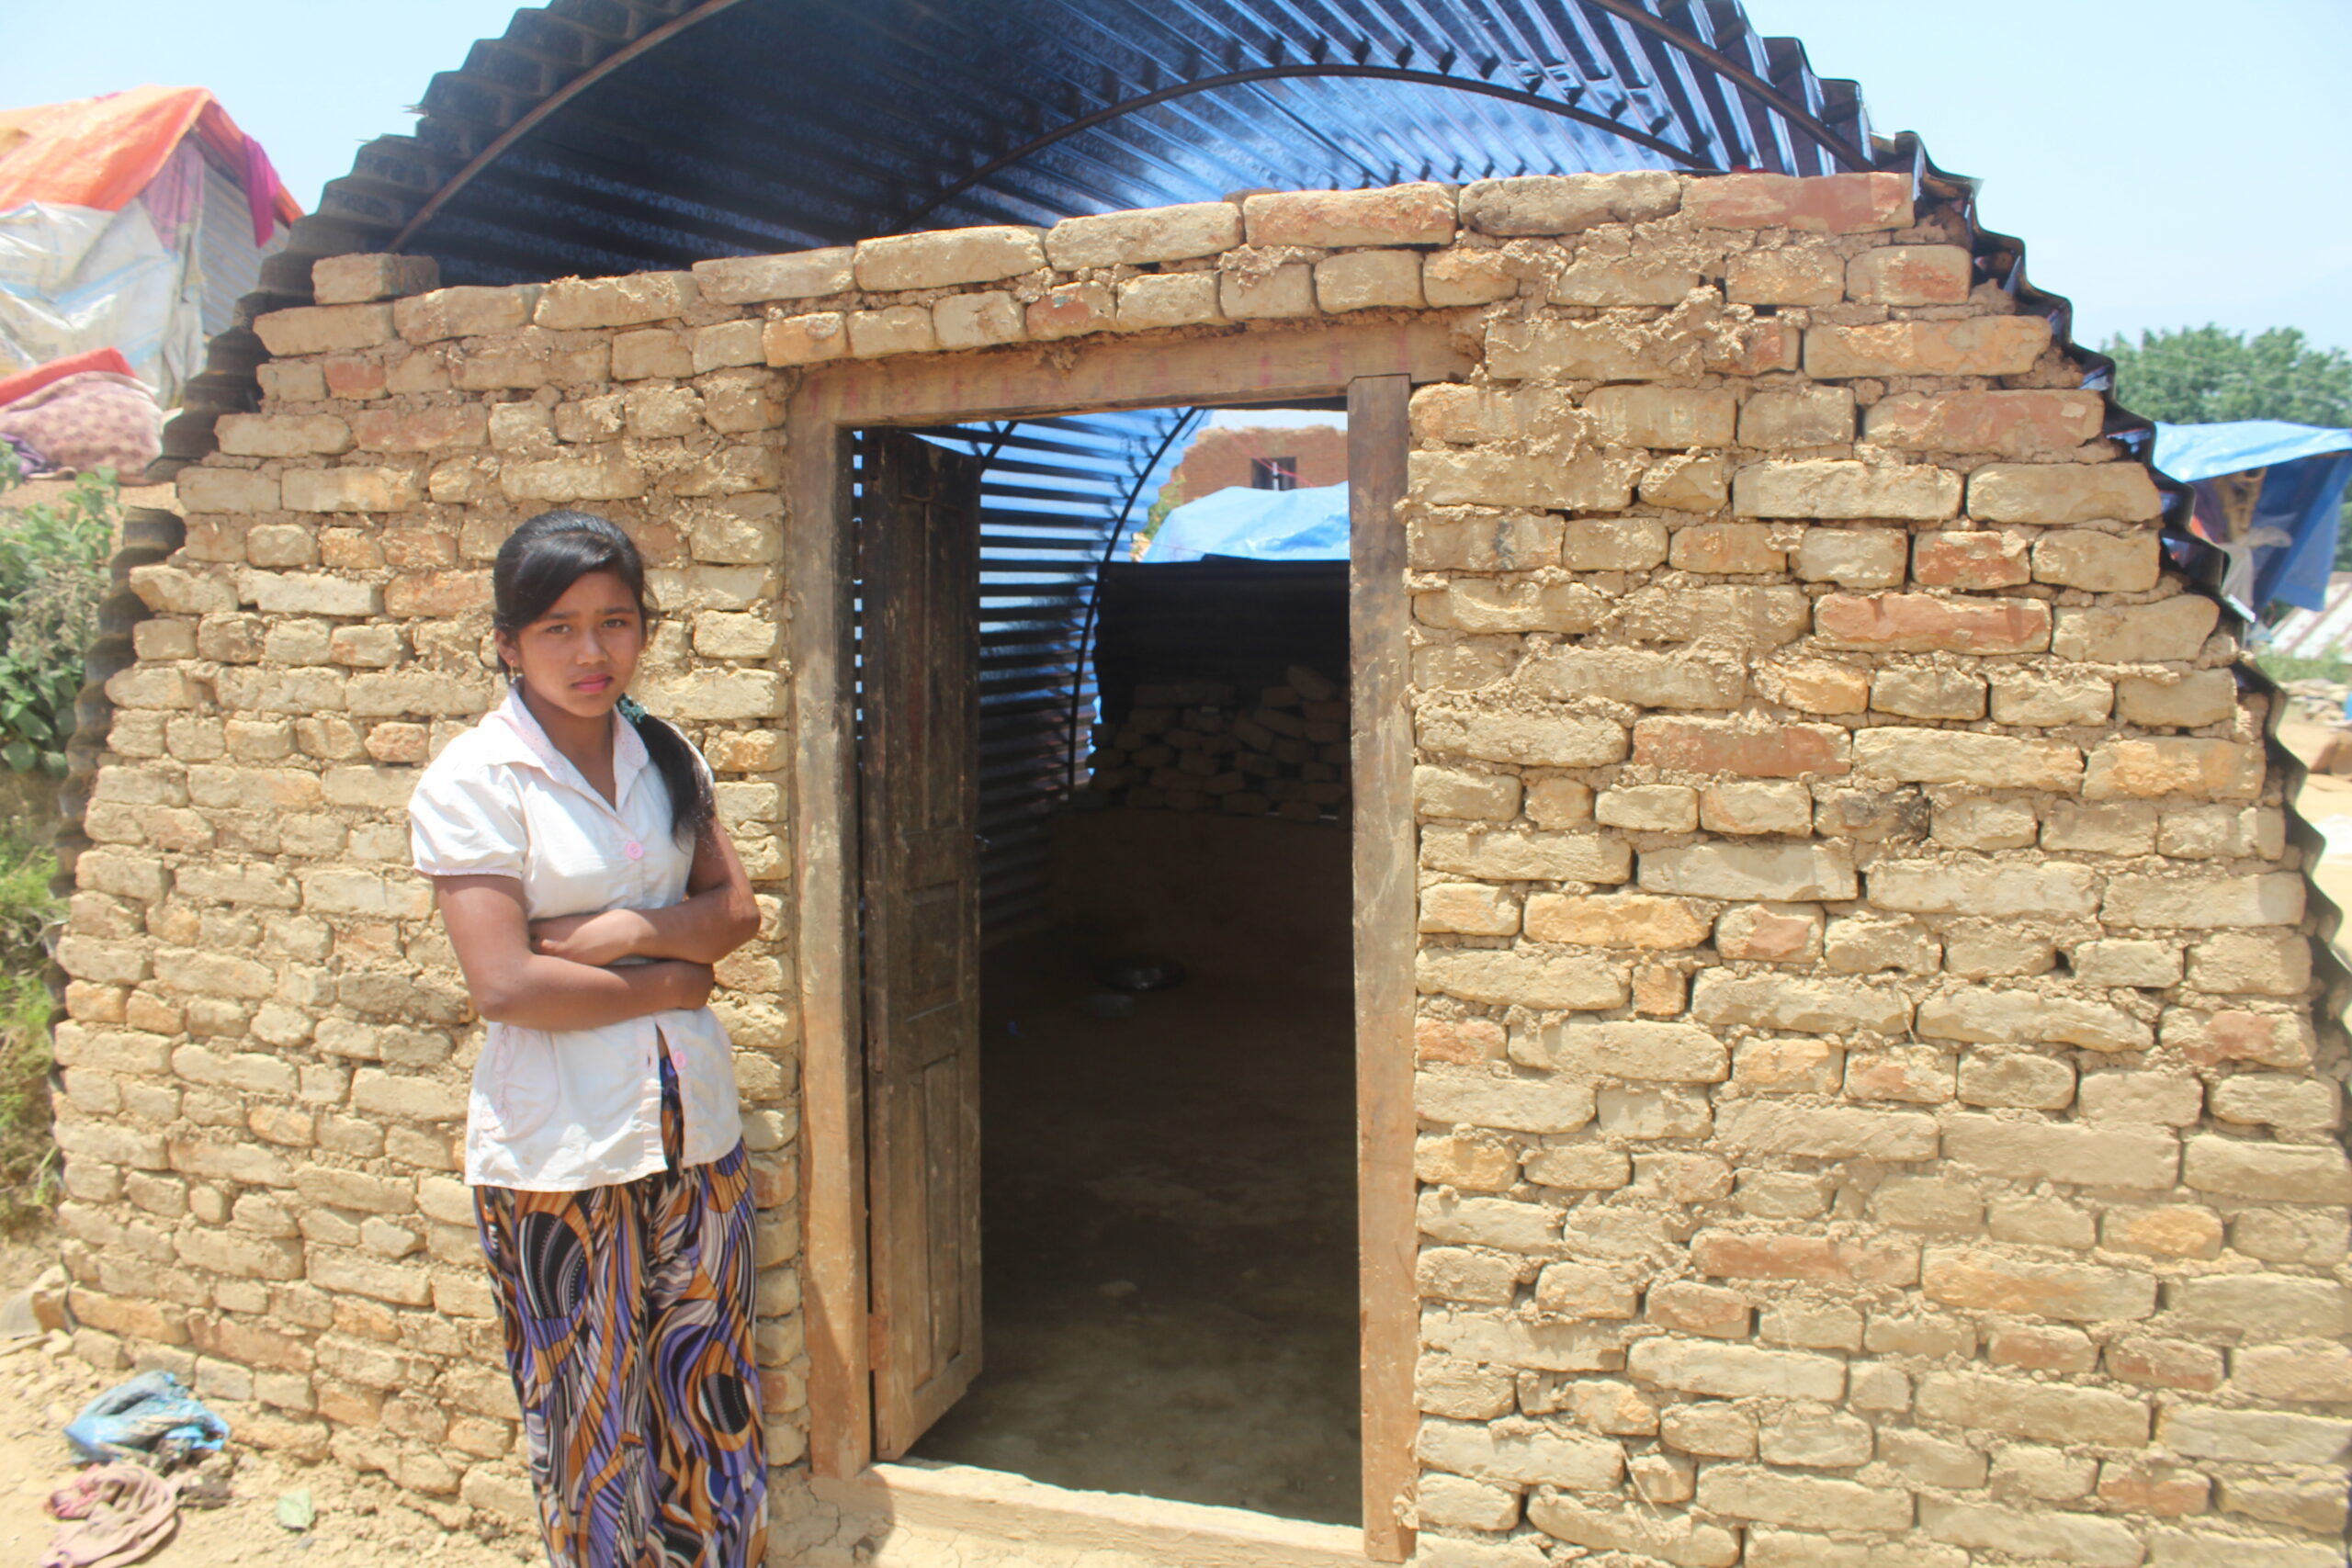 Global Peace Foundation volunteers build a transitional shelter for Nepal families.